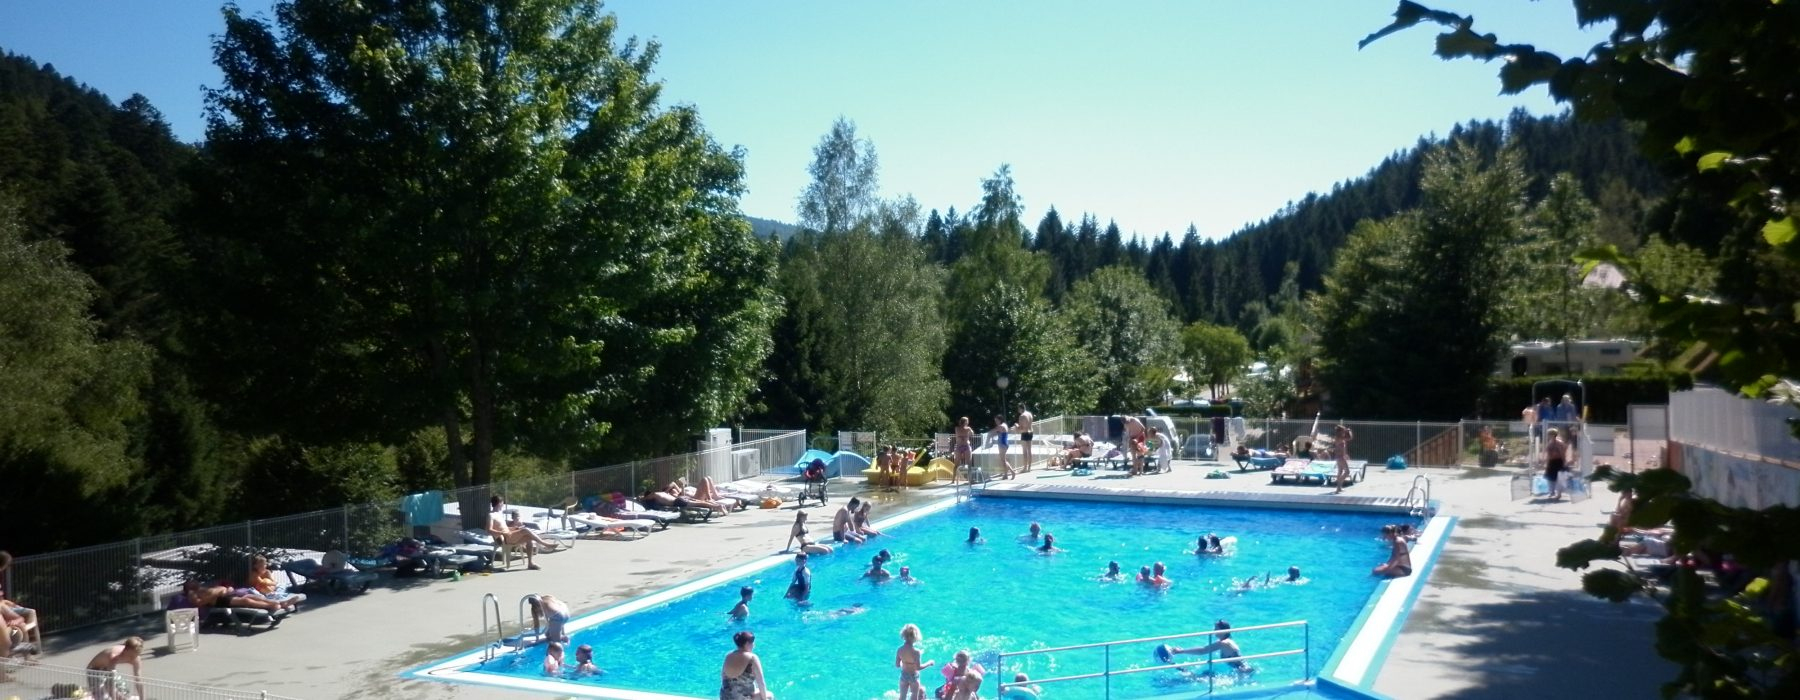 Swimming Pool Area | Camping Belle Hutte intérieur Camping Vosges Piscine